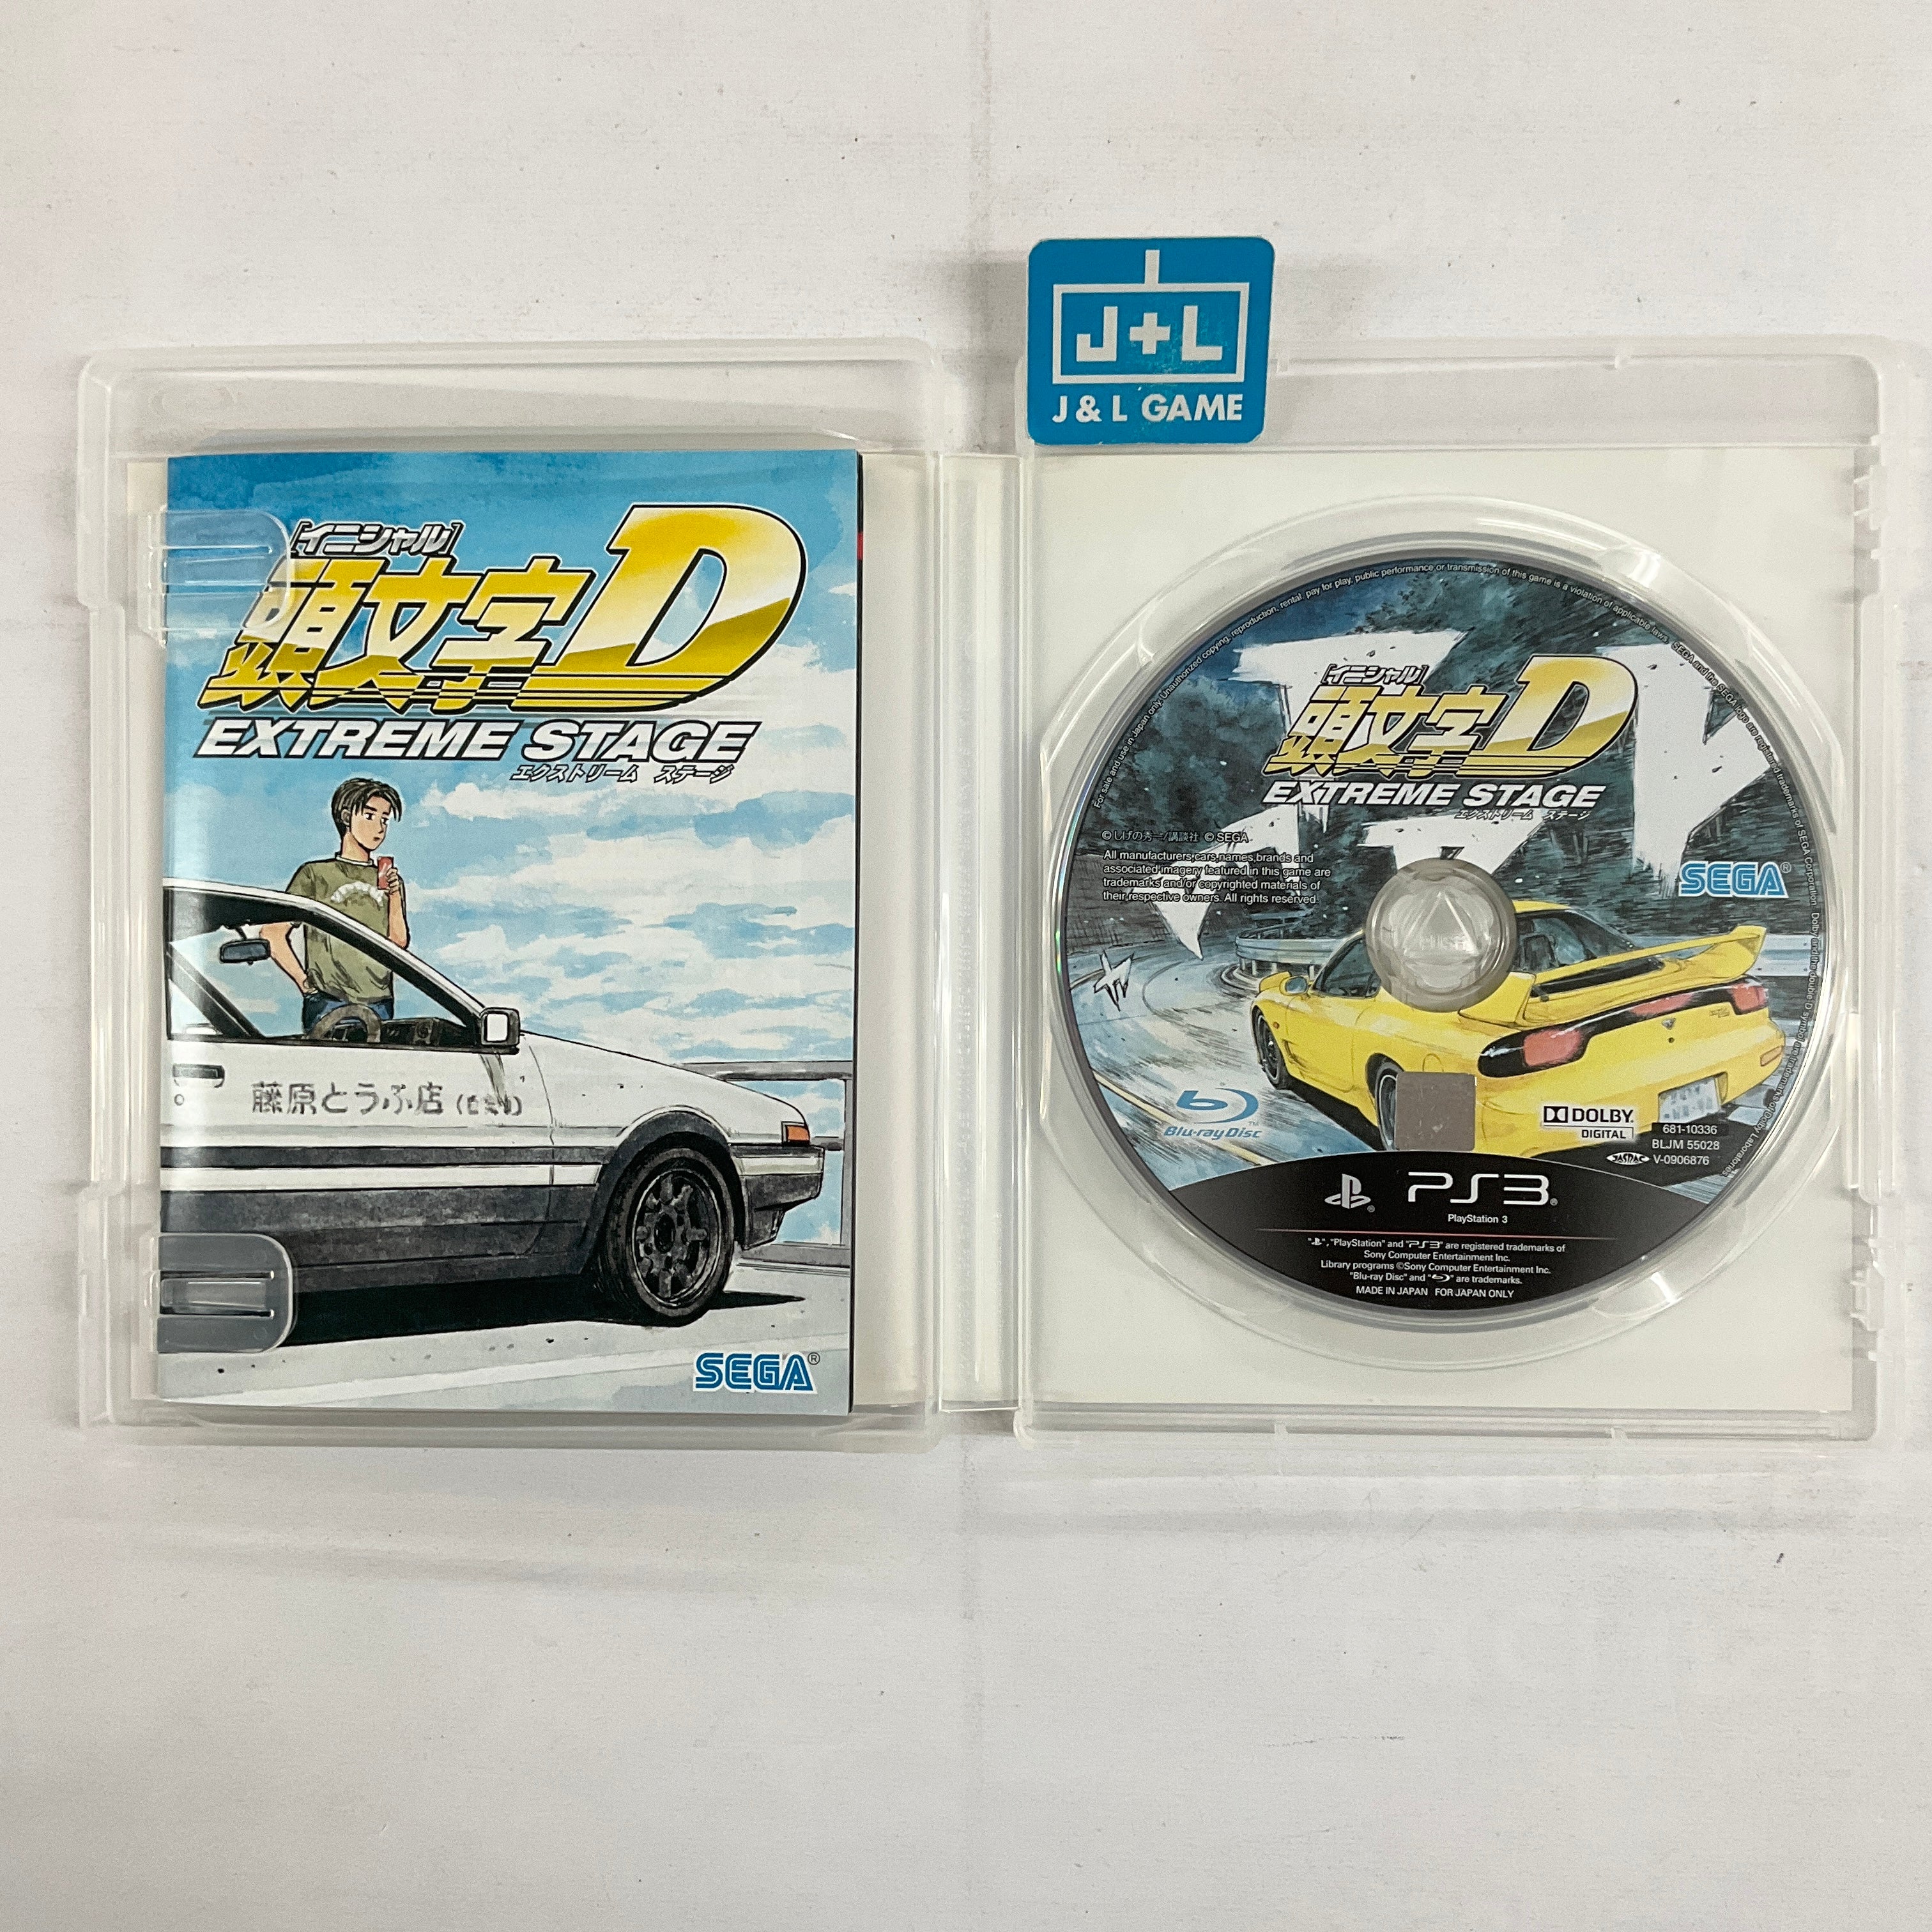 Initial D: Extreme Stage (PlayStation 3 the Best) - (PS3) PlayStation 3 [Pre-Owned] (Japanese Import) Video Games Sega   